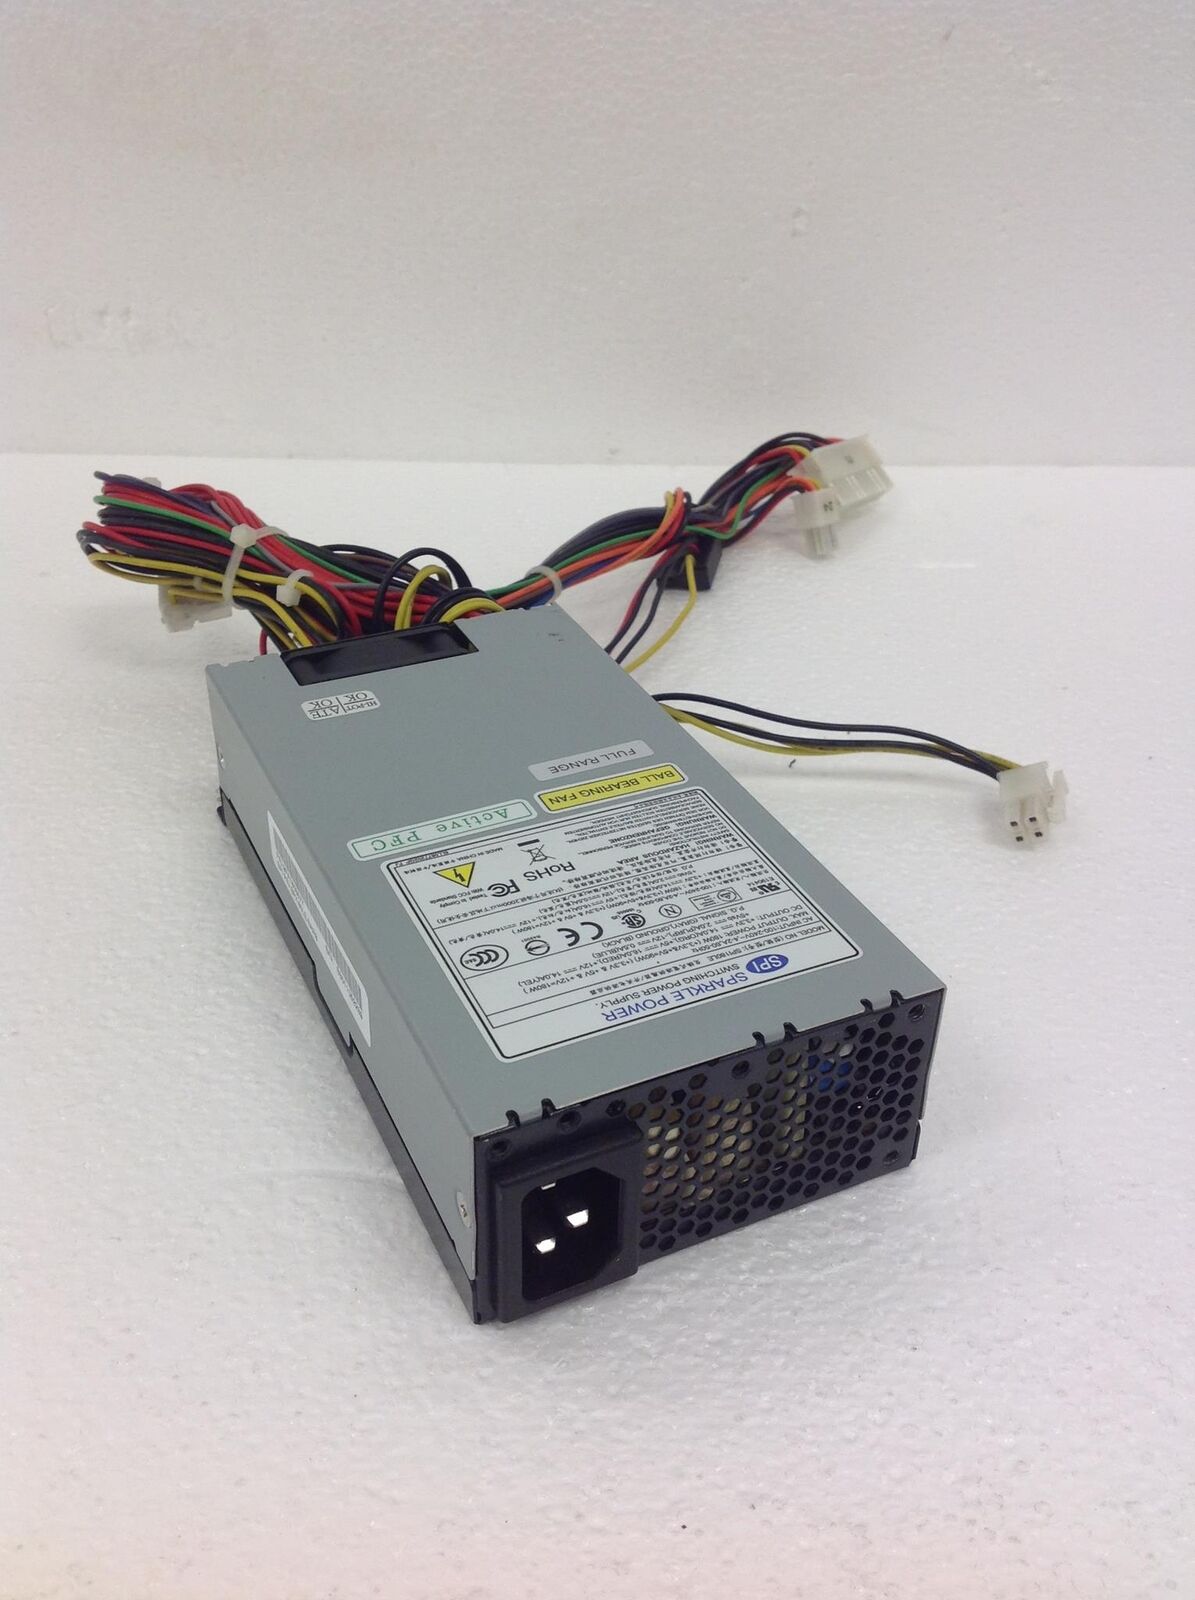 Spi Sparkle Power Spi180le Power Supply 180W Used  Great Deal